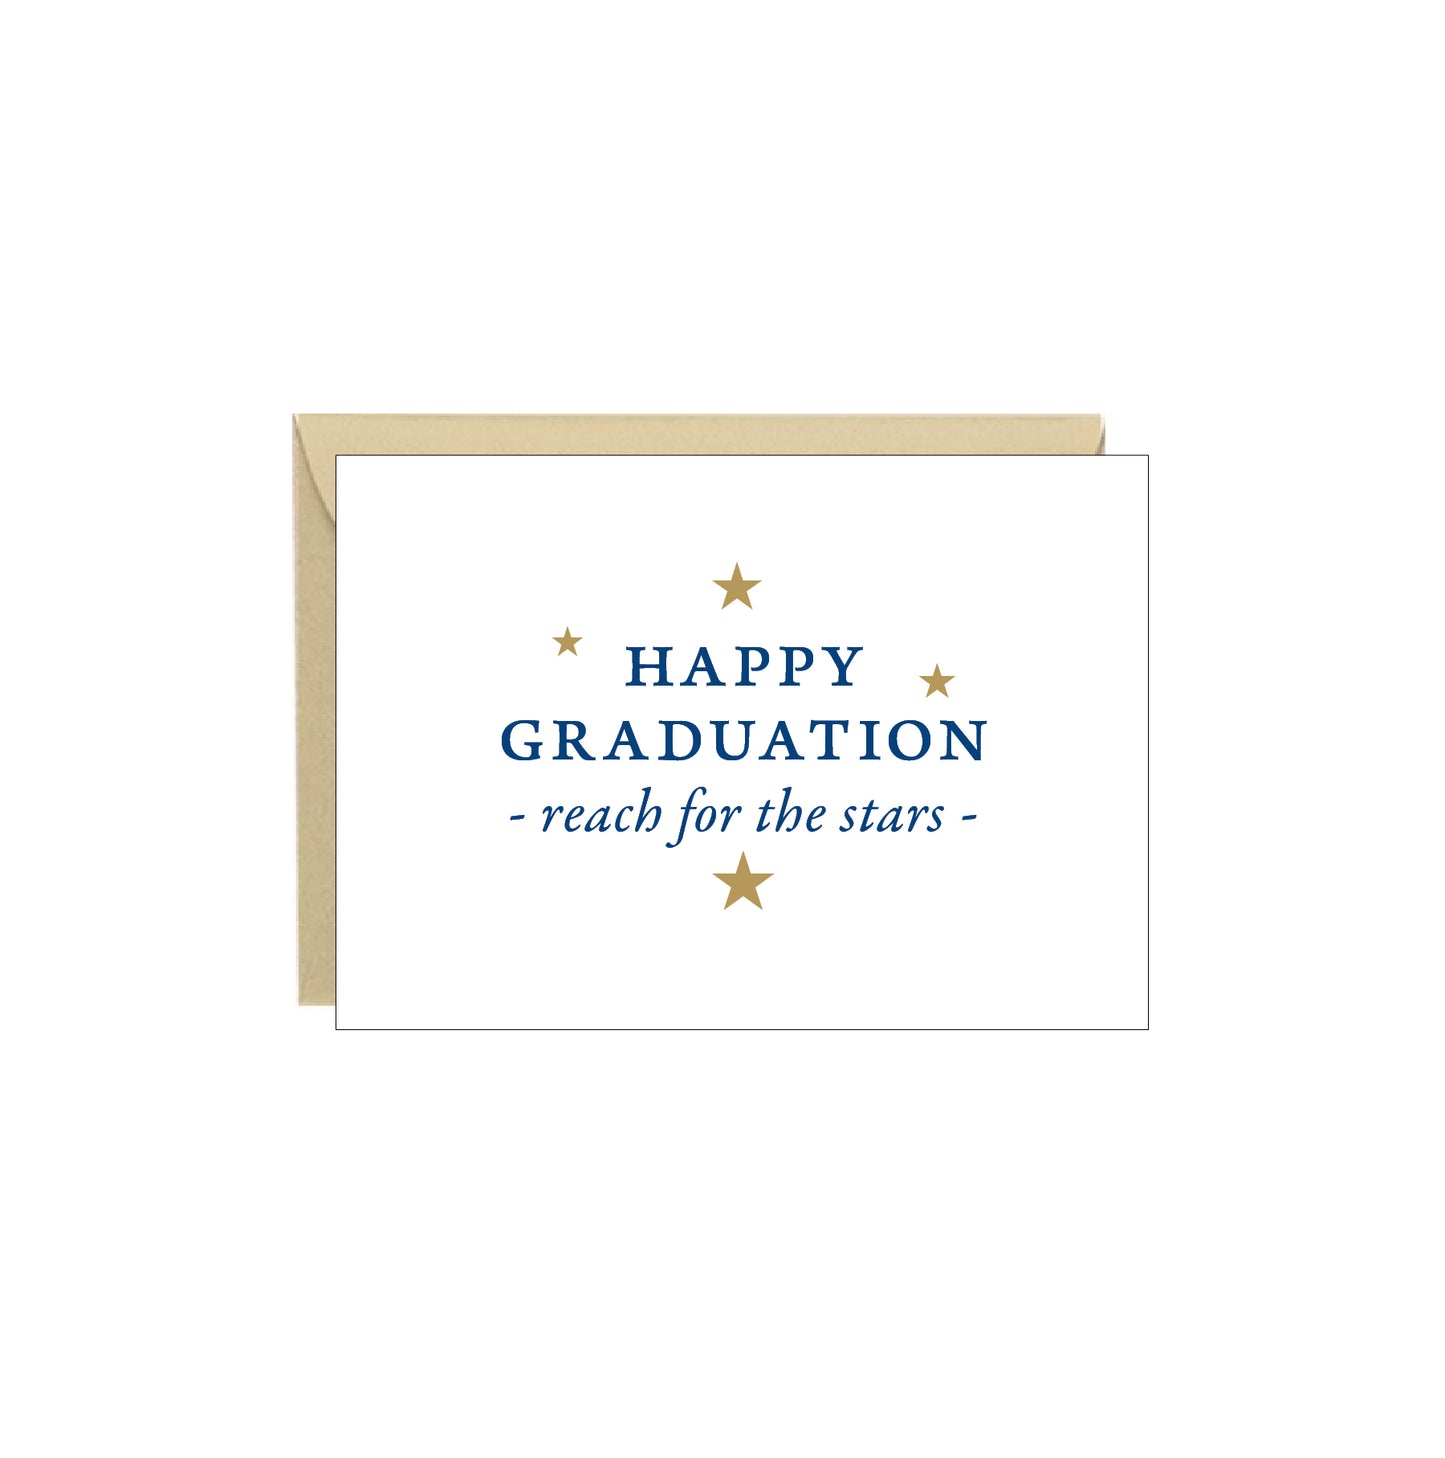 Enclosure Card - Happy Graduation Reach for the Stars - 4 pack